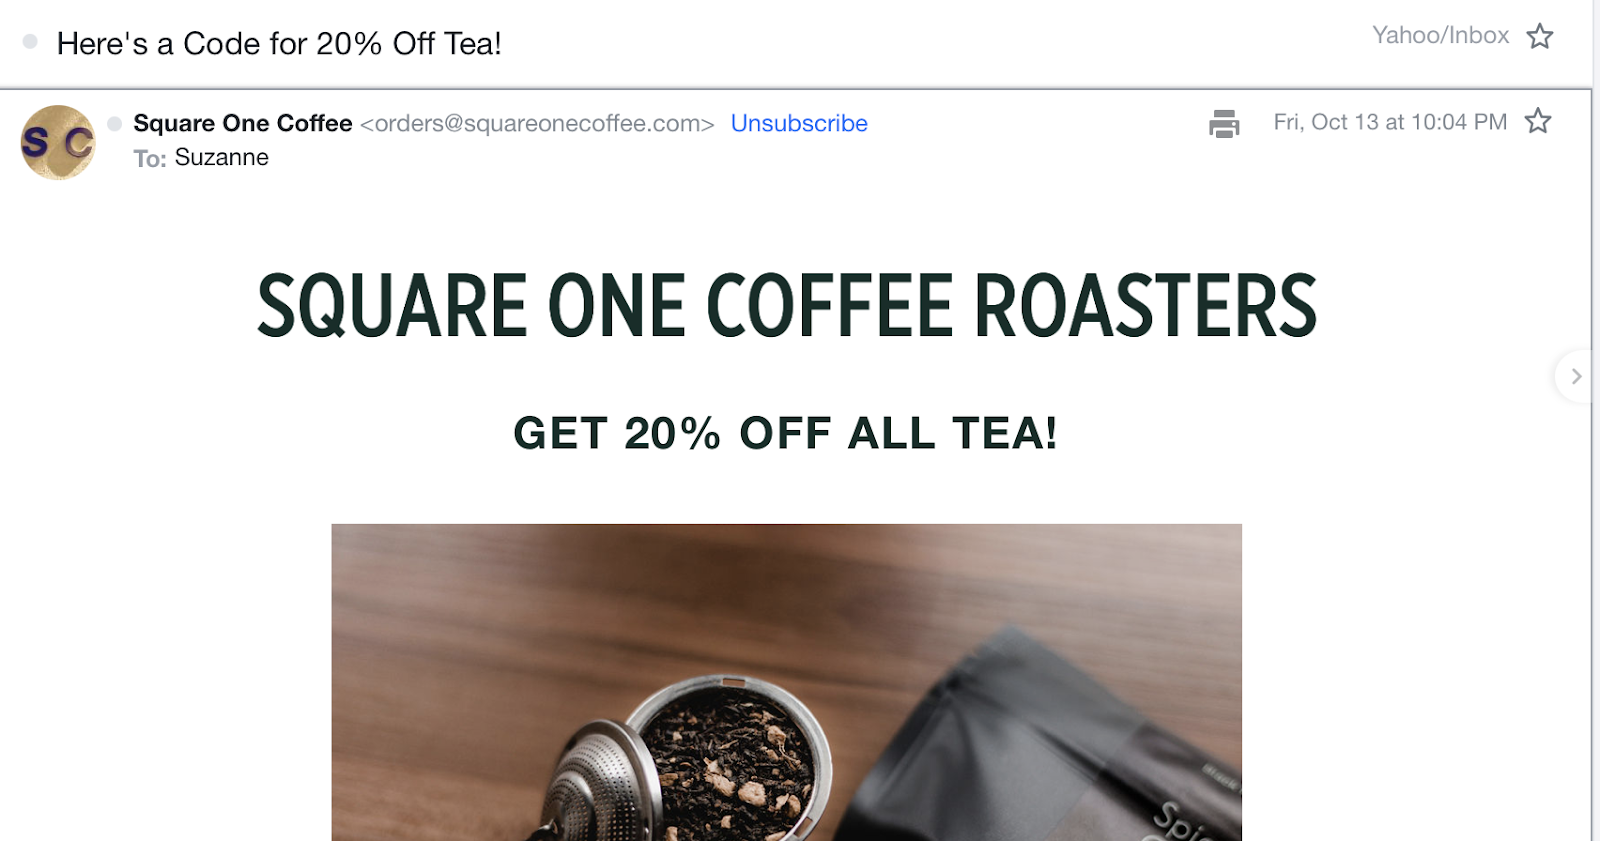 Square One Coffee Roasters Email for 20% off tea. 